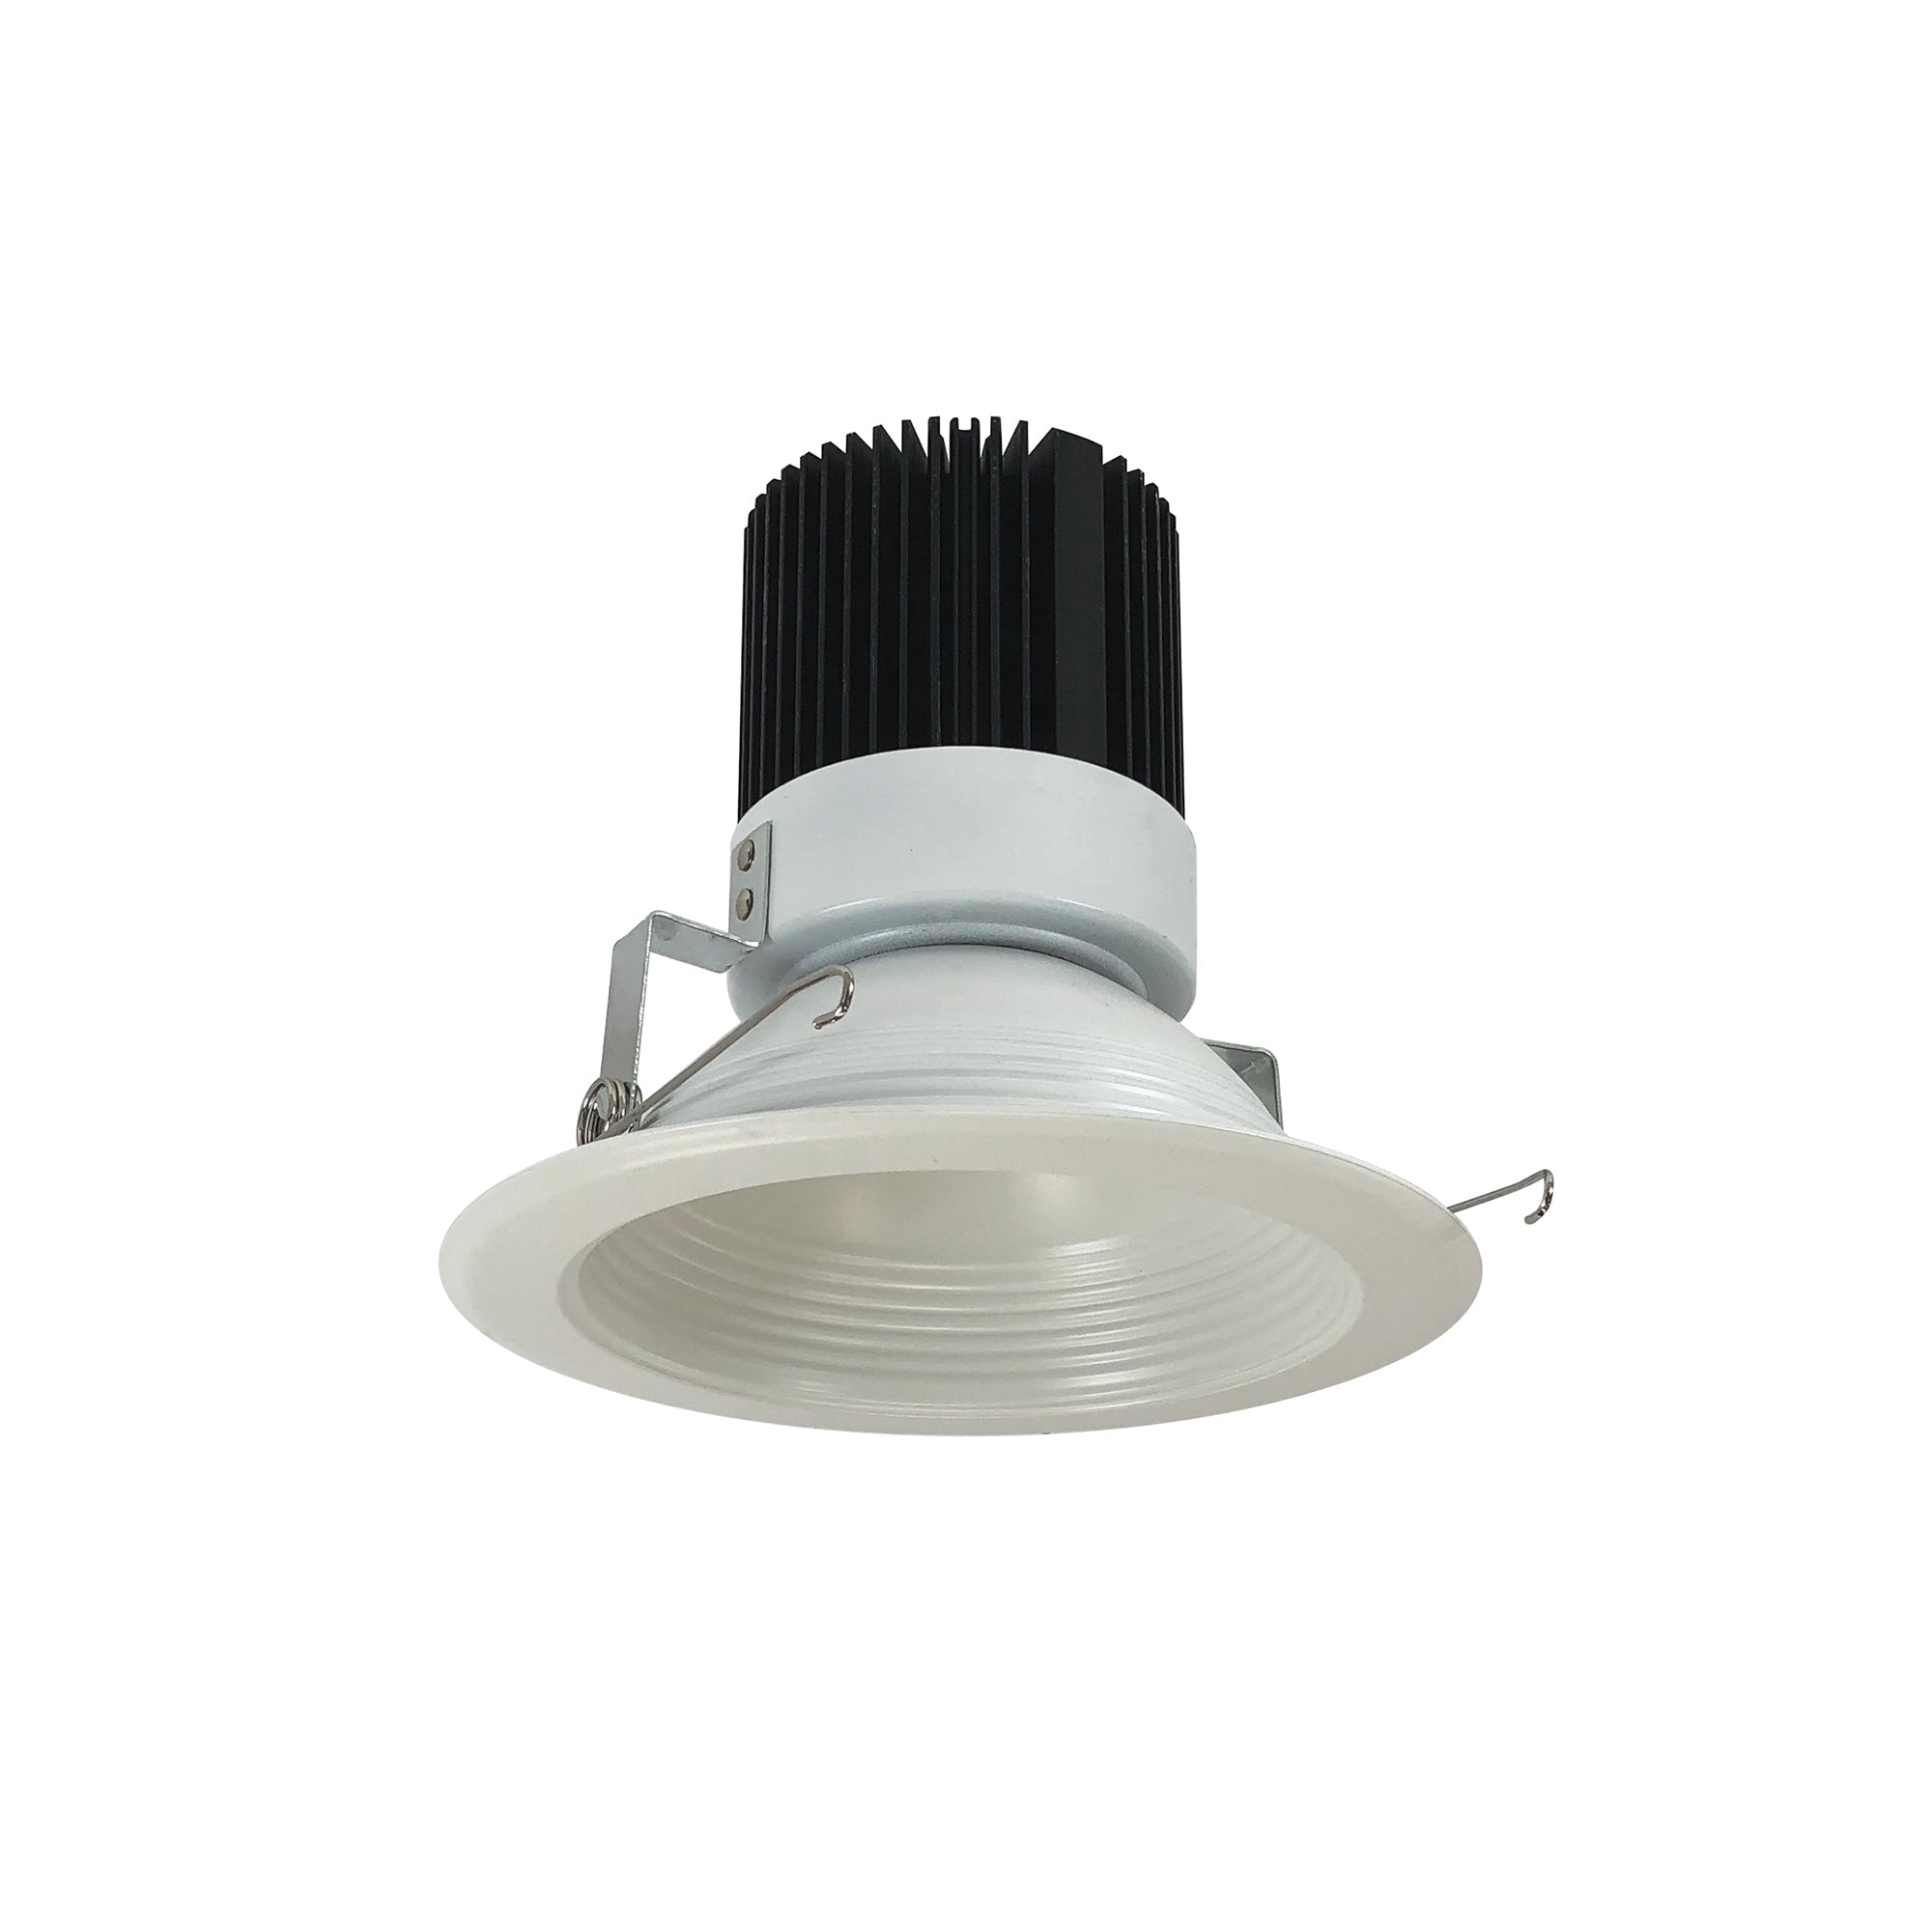 Nora Lighting NRM2-612L2530MMPW - Recessed - 6 Inch Marquise II Round Baffle, Medium Flood, 2500lm, 3000K, Matte Powder White (Available with Non-IC Housings Only)